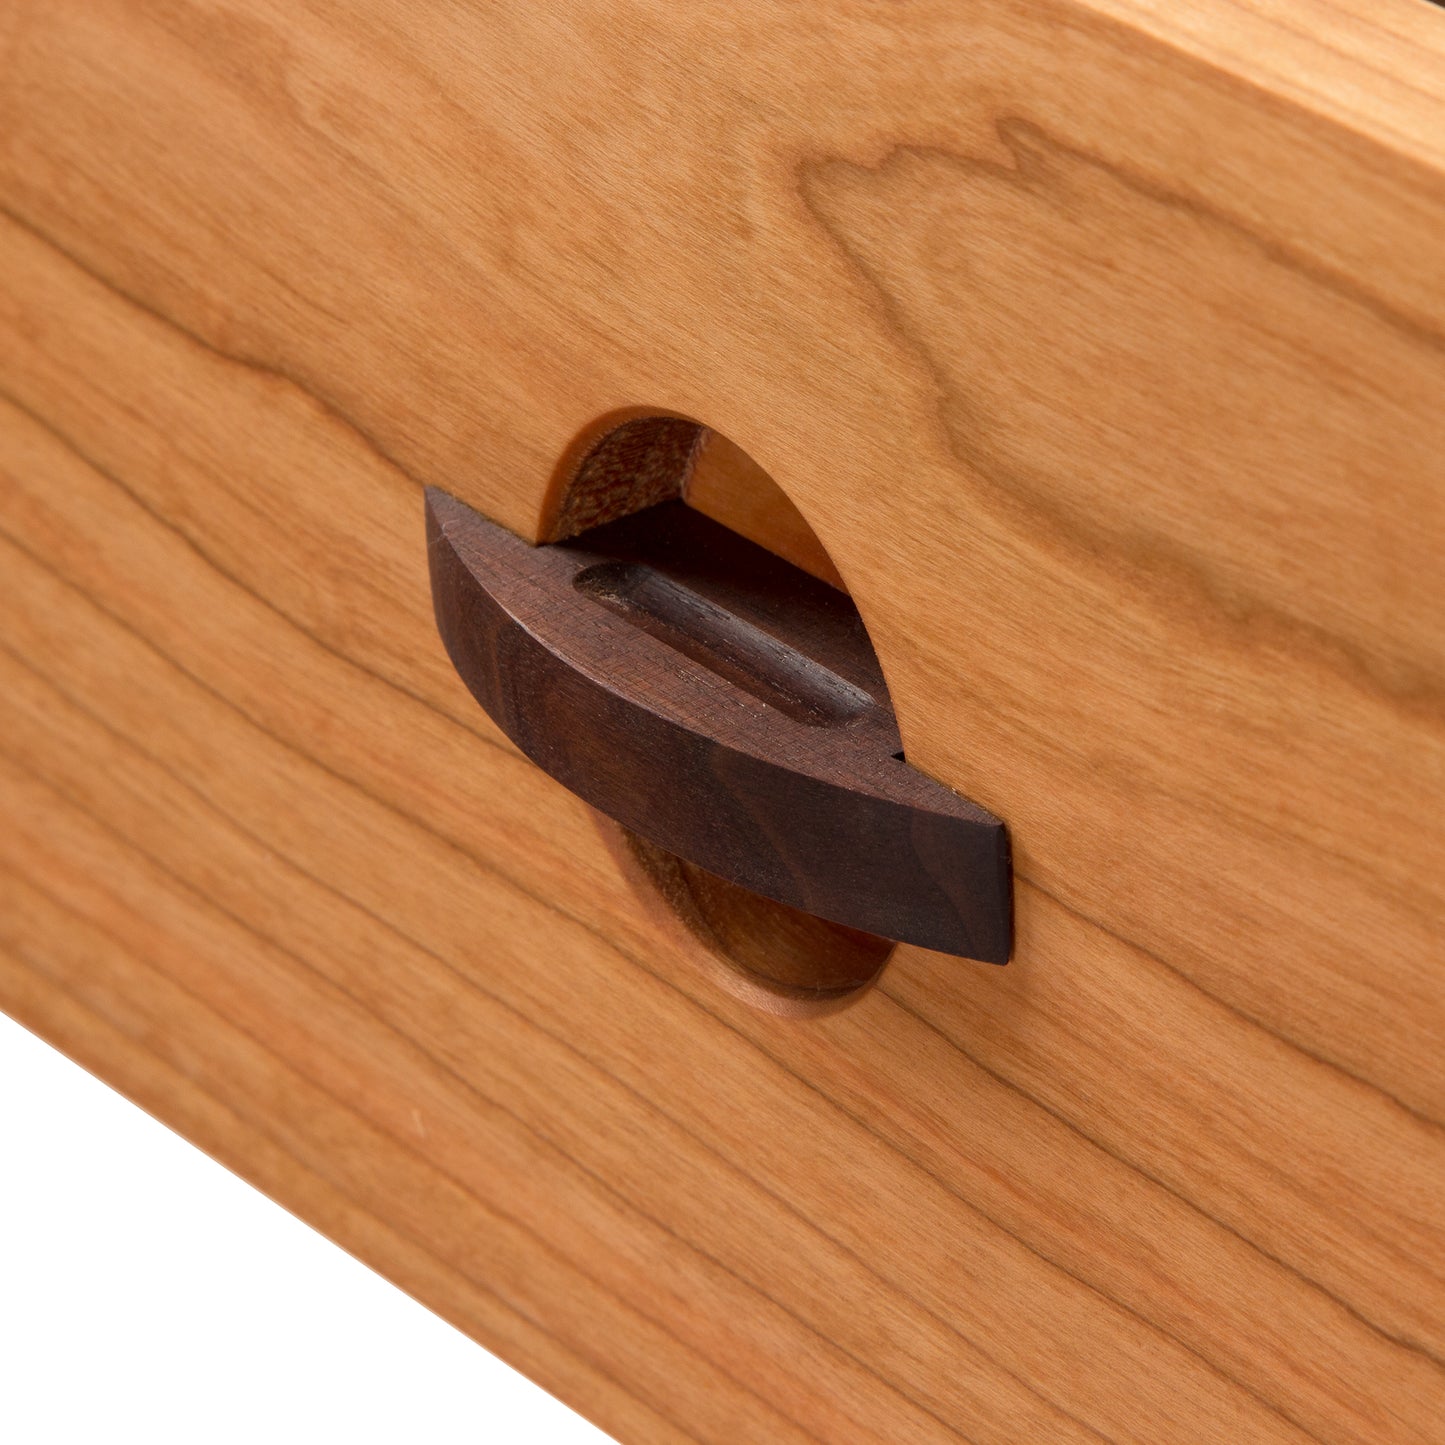 A close up of a Maple Corner Woodworks Cherry Moon 7-Drawer Dresser with a handmade wooden drawer and handle.